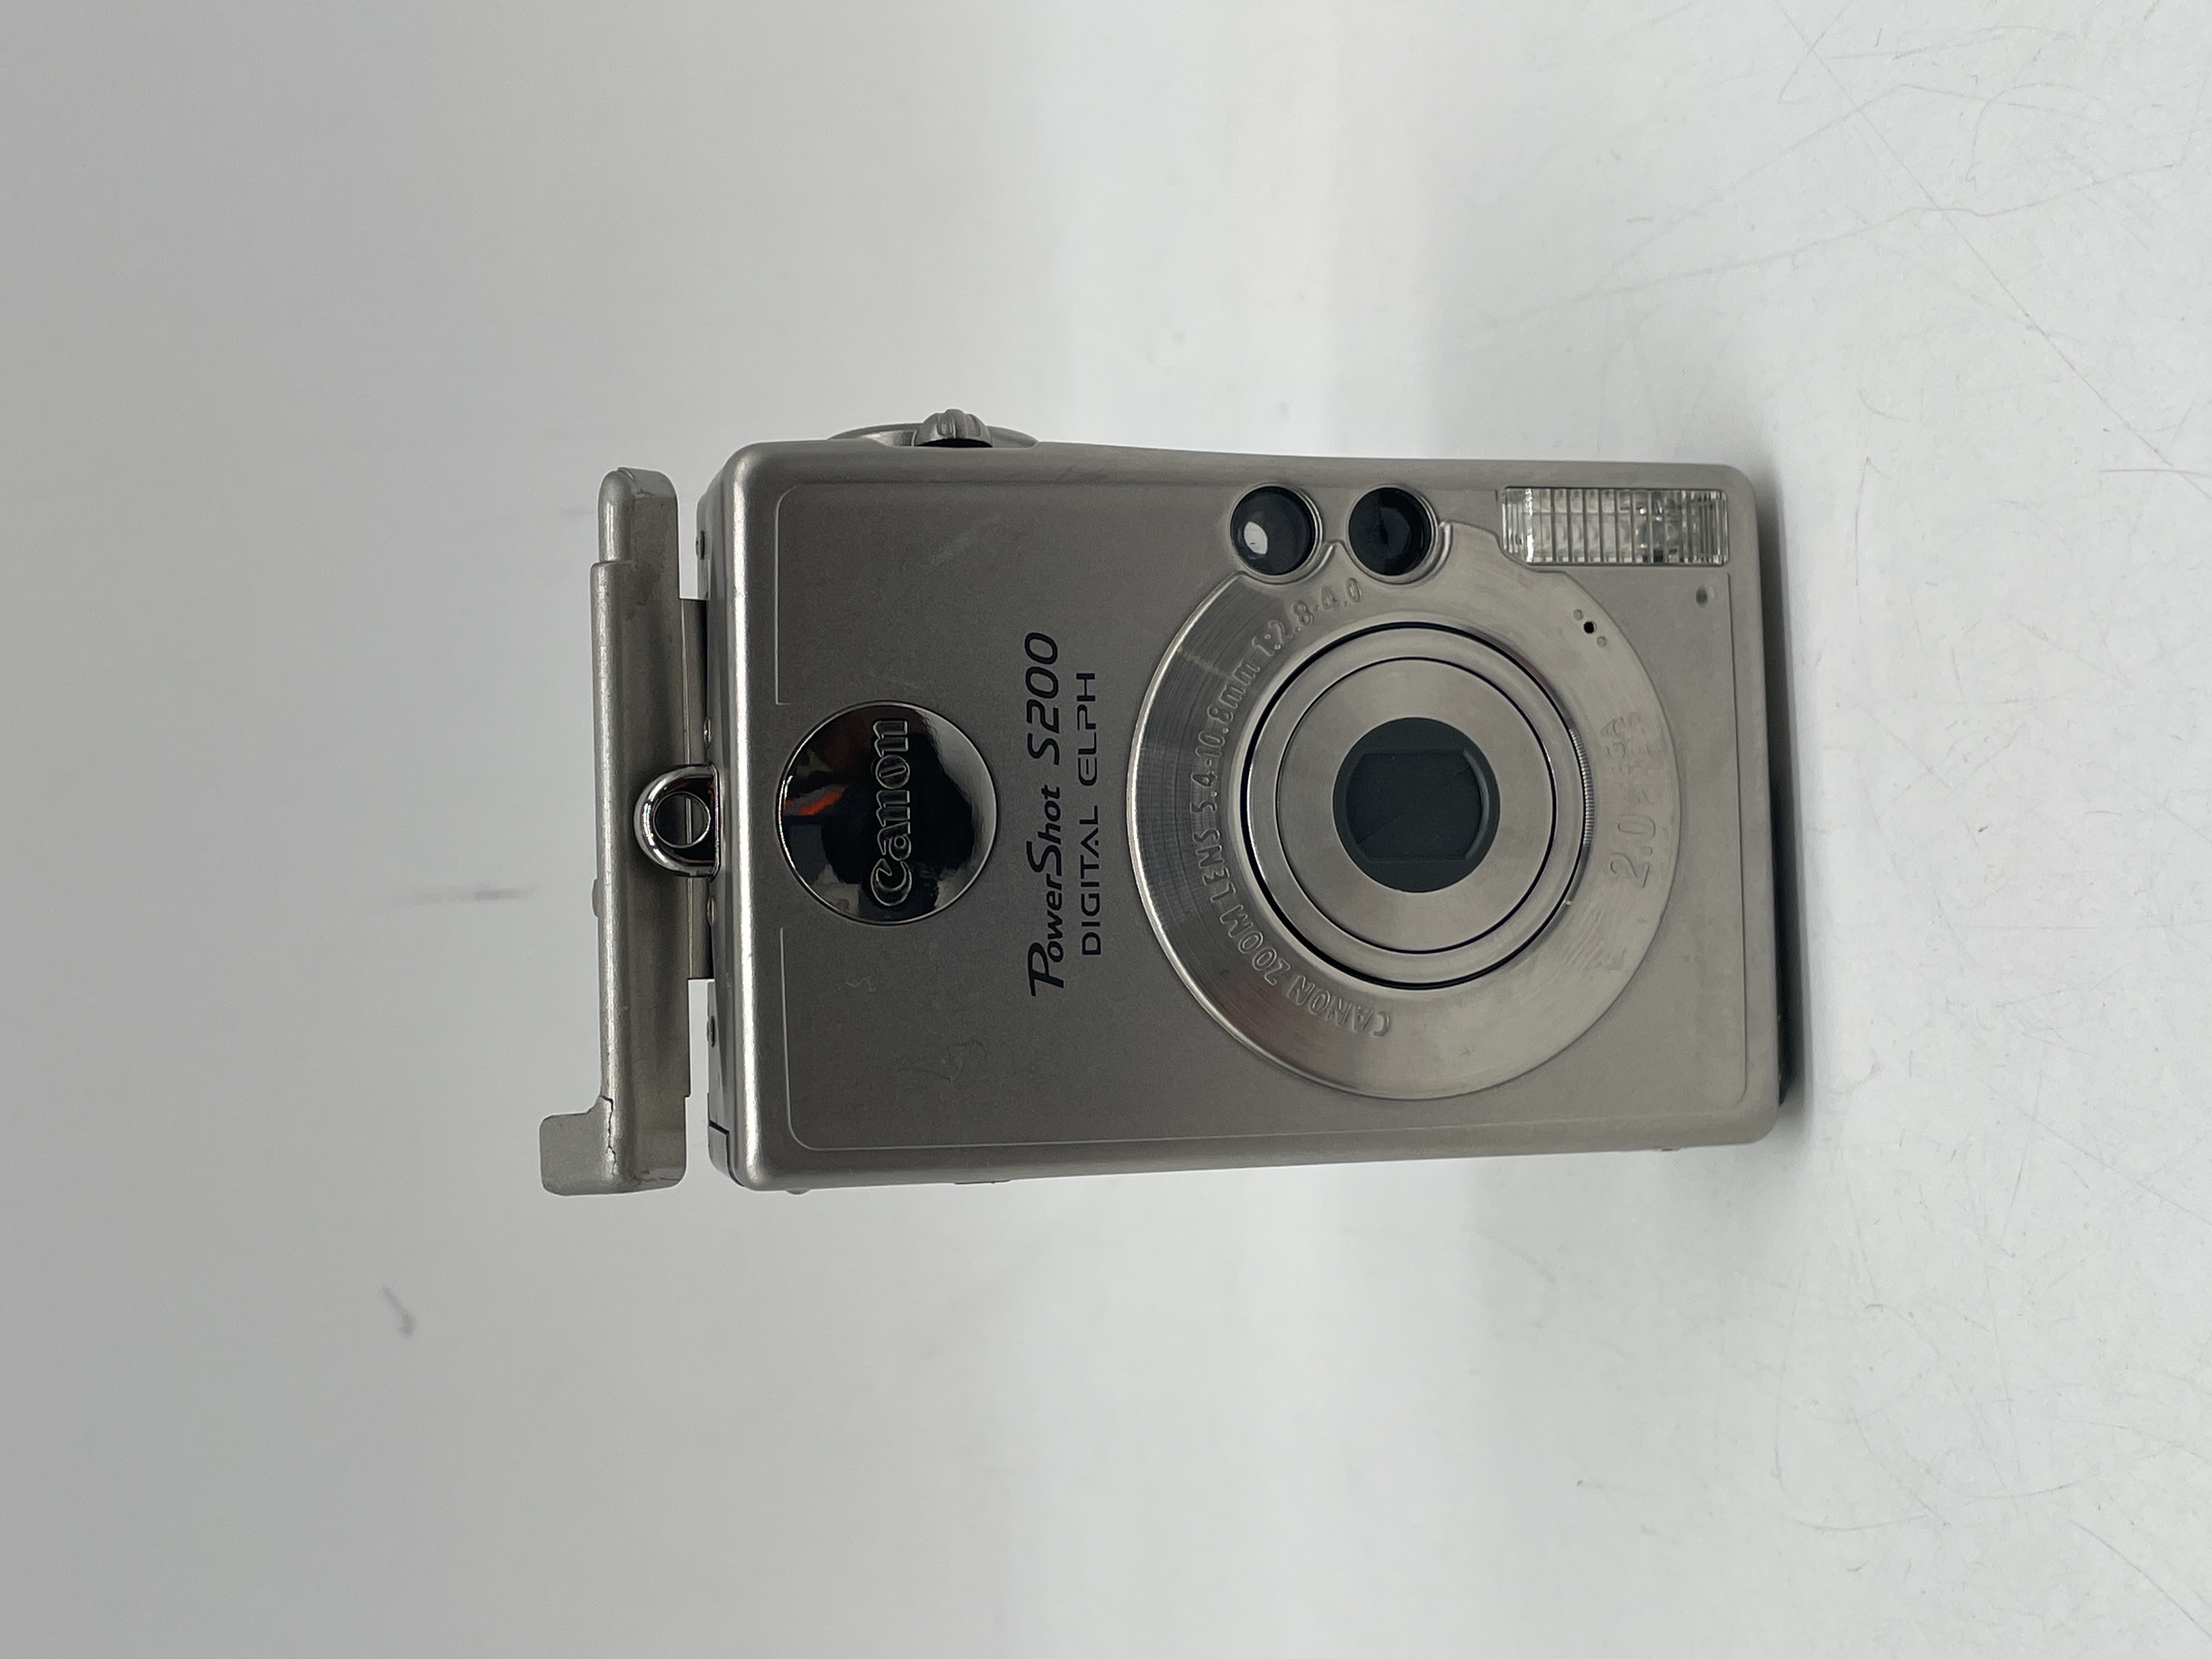 Buy the Power Shot S200 ELPH Silver 2.0MP Compact Digital Camera